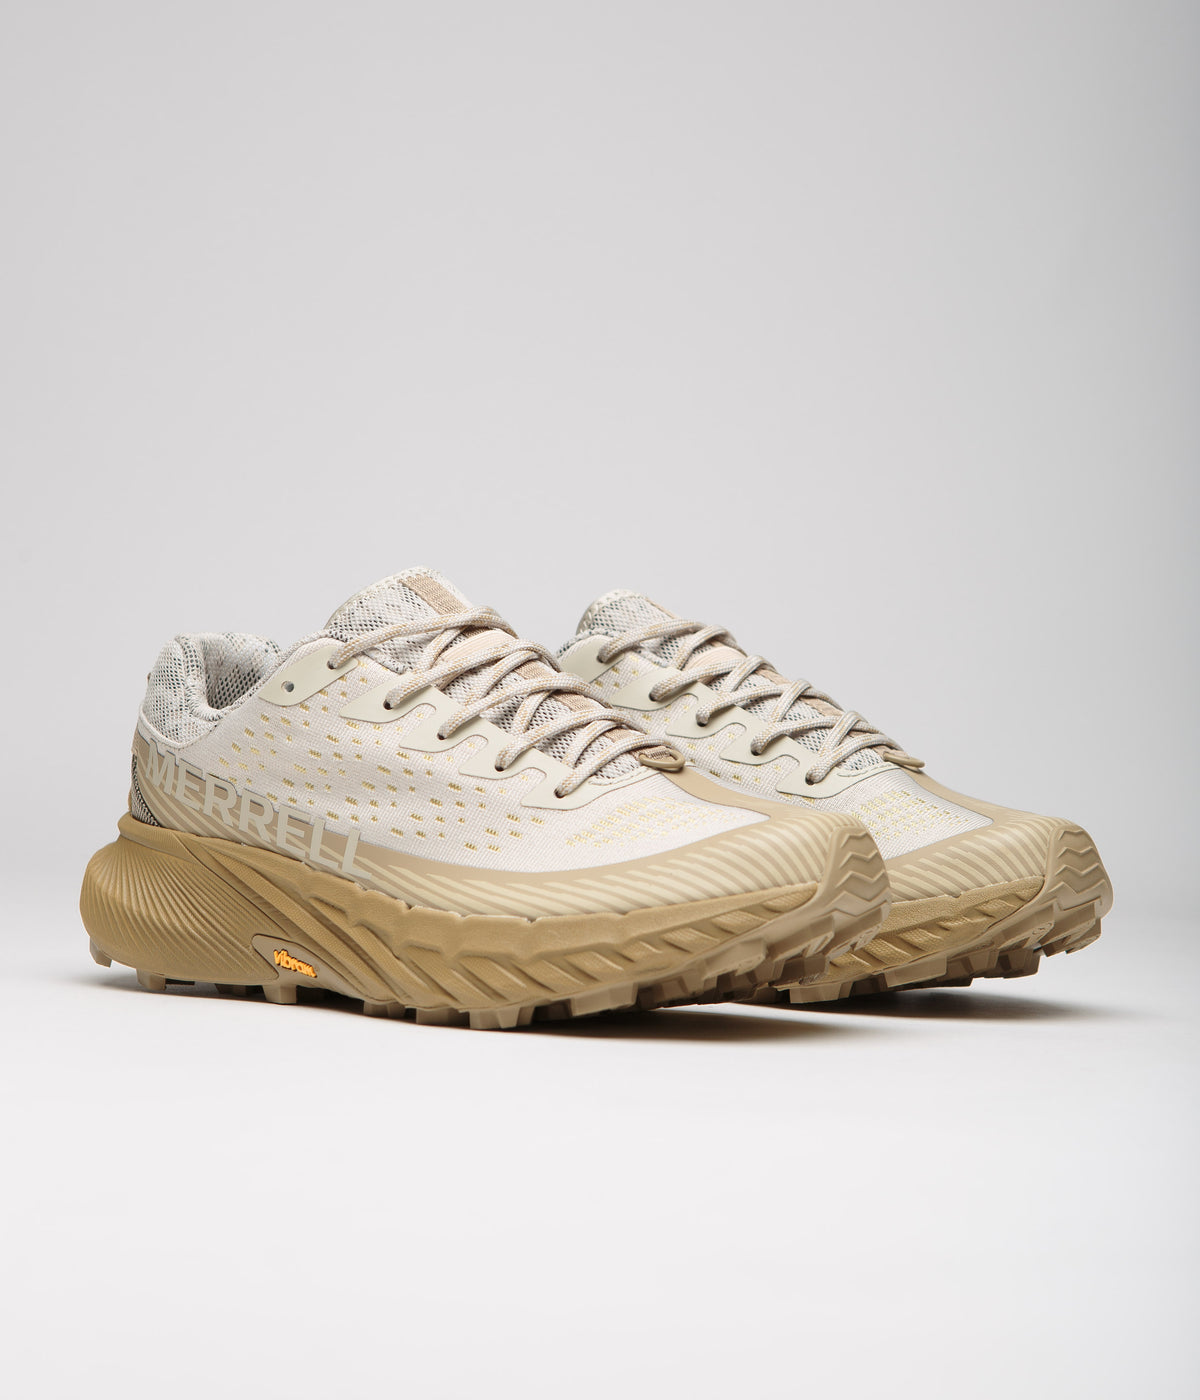 Merrell Agility Peak 5 Shoes - Oyster / Coyote | Always in Colour